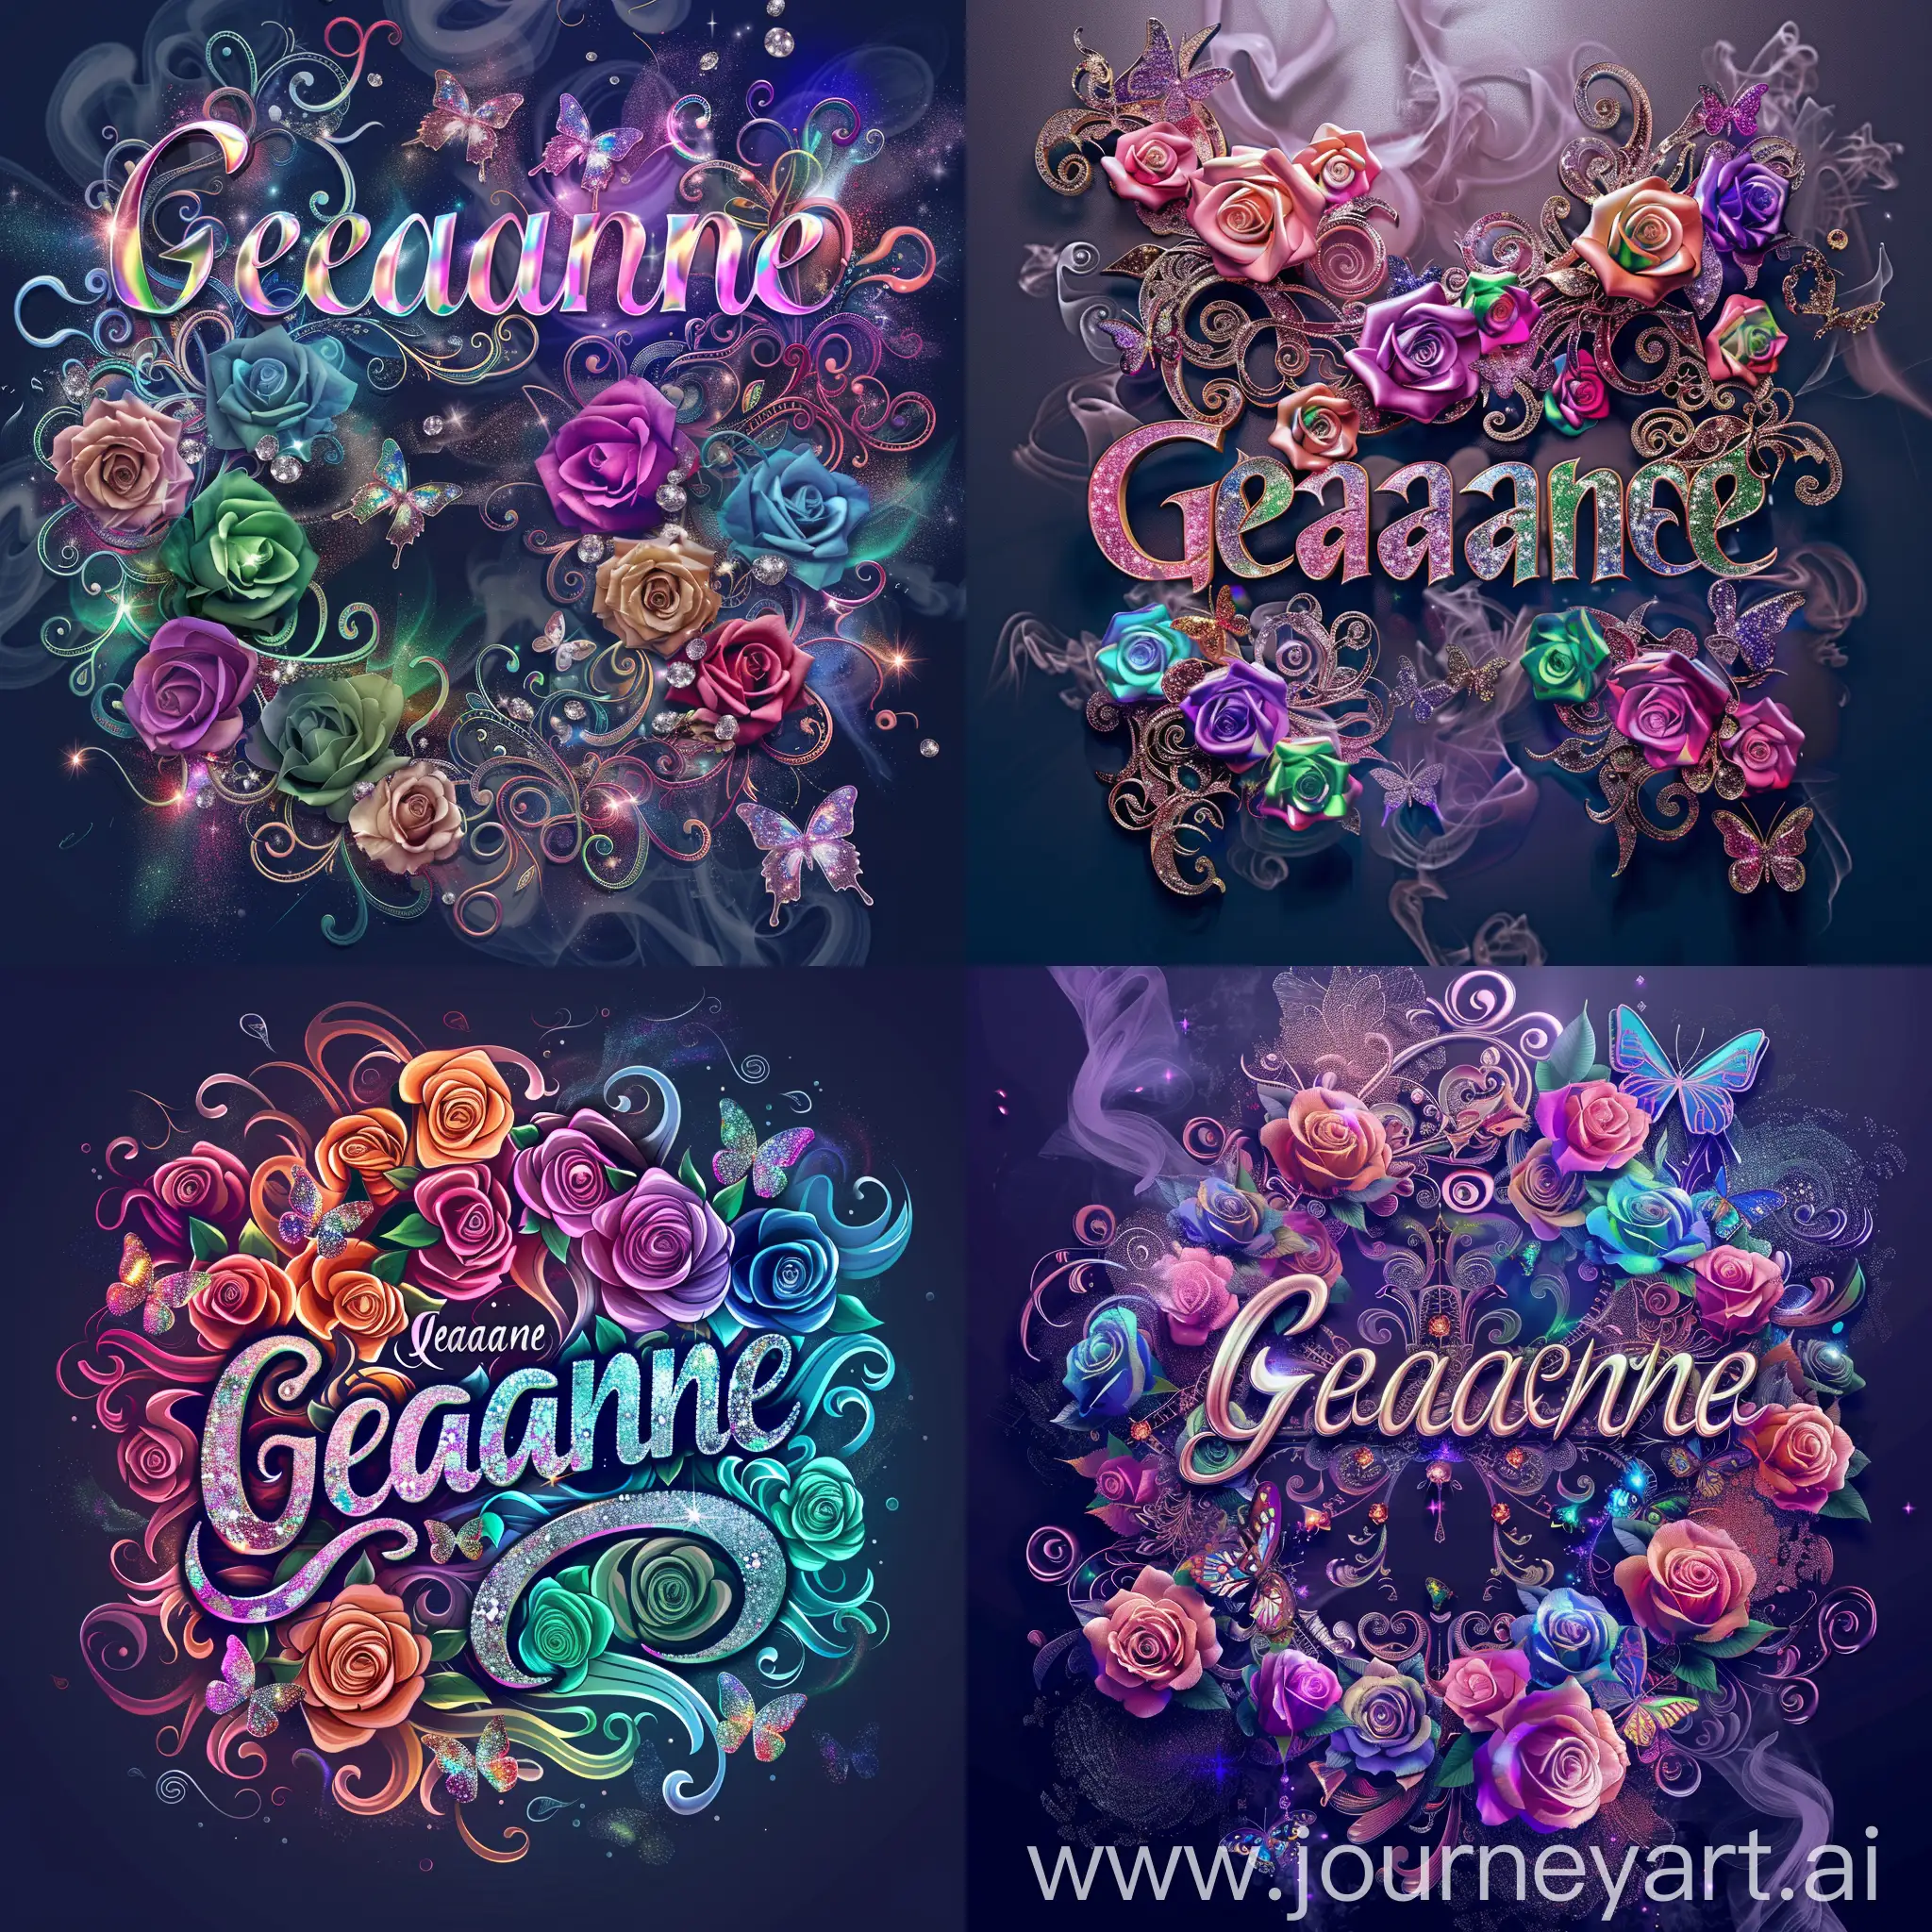 name Geannene in block font filled with iridescent roses and filigree with multicolored roses, diamonds and butterflies glitter swirls of epic smoke